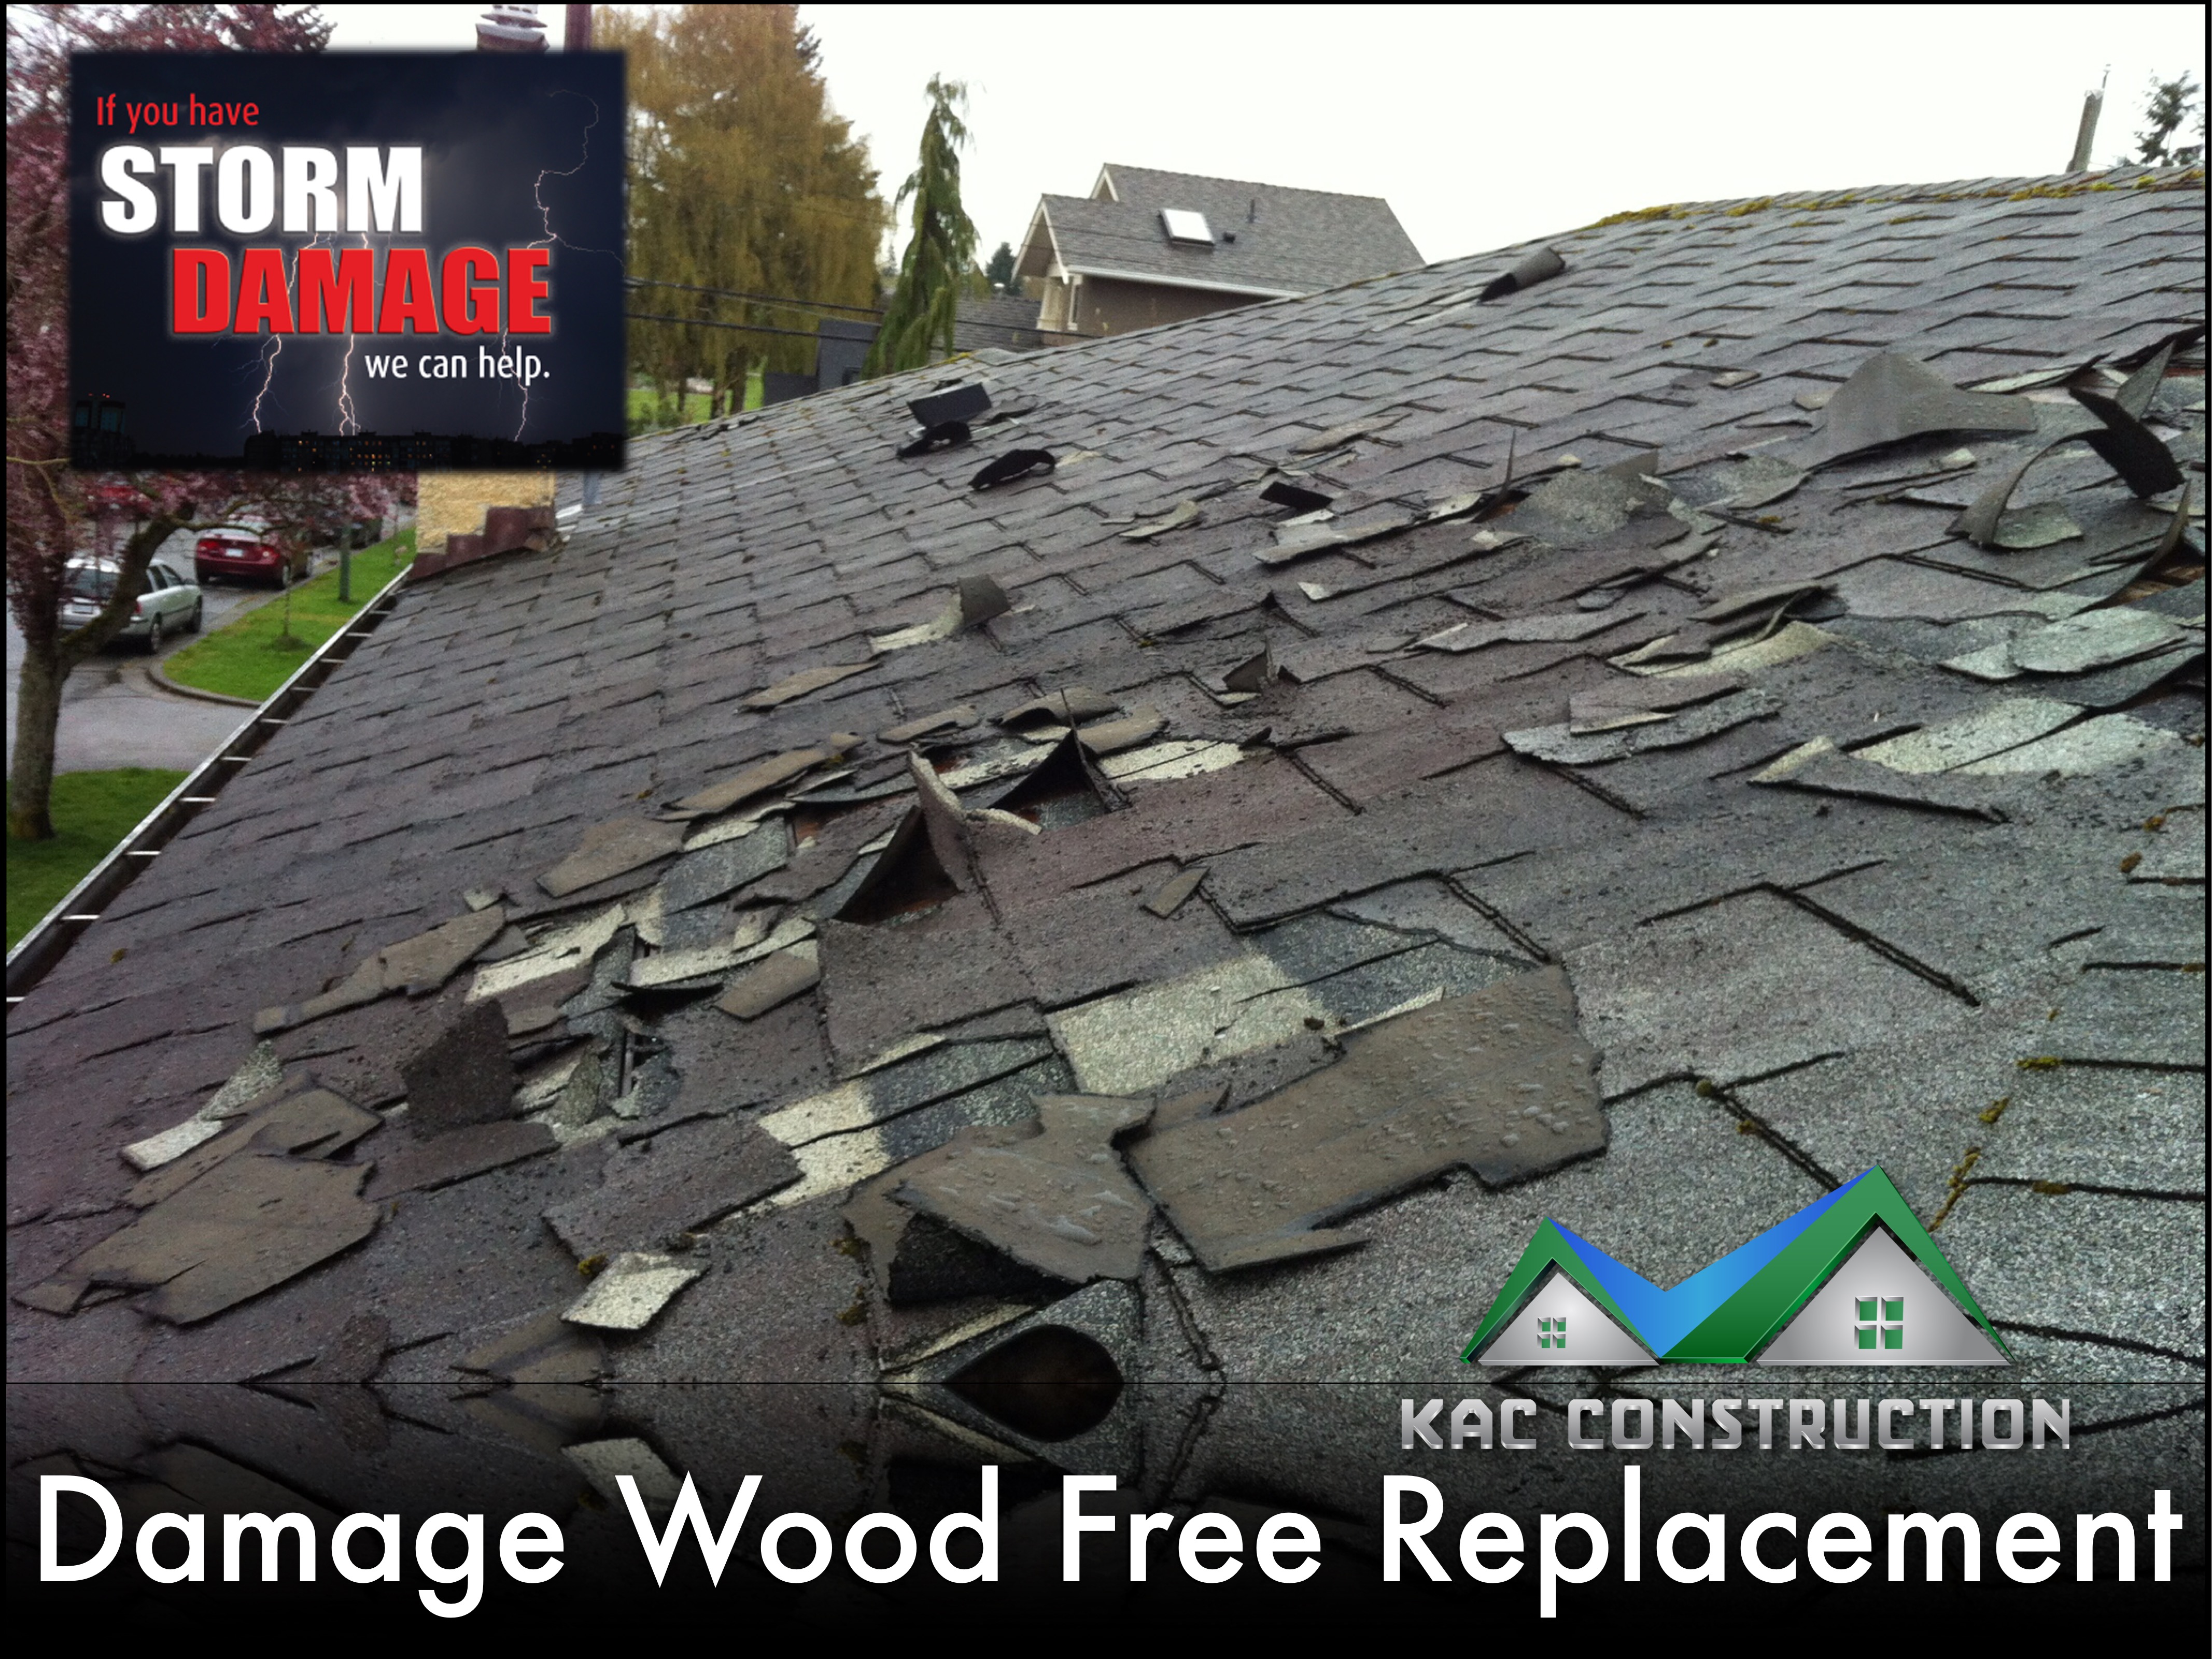 WIND DAMAGE ROOF REPLACEMENT, WIND DAMAGE ROOF REPLACEMENT CT, WIND DAMAGE ROOF RE, WIND DAMAGE ROOOOF, WIND DAMAGE ROOF REPLACEMENT NEW LONDON, WIND DAMAGE ROOF REPLACEMENT IN CT